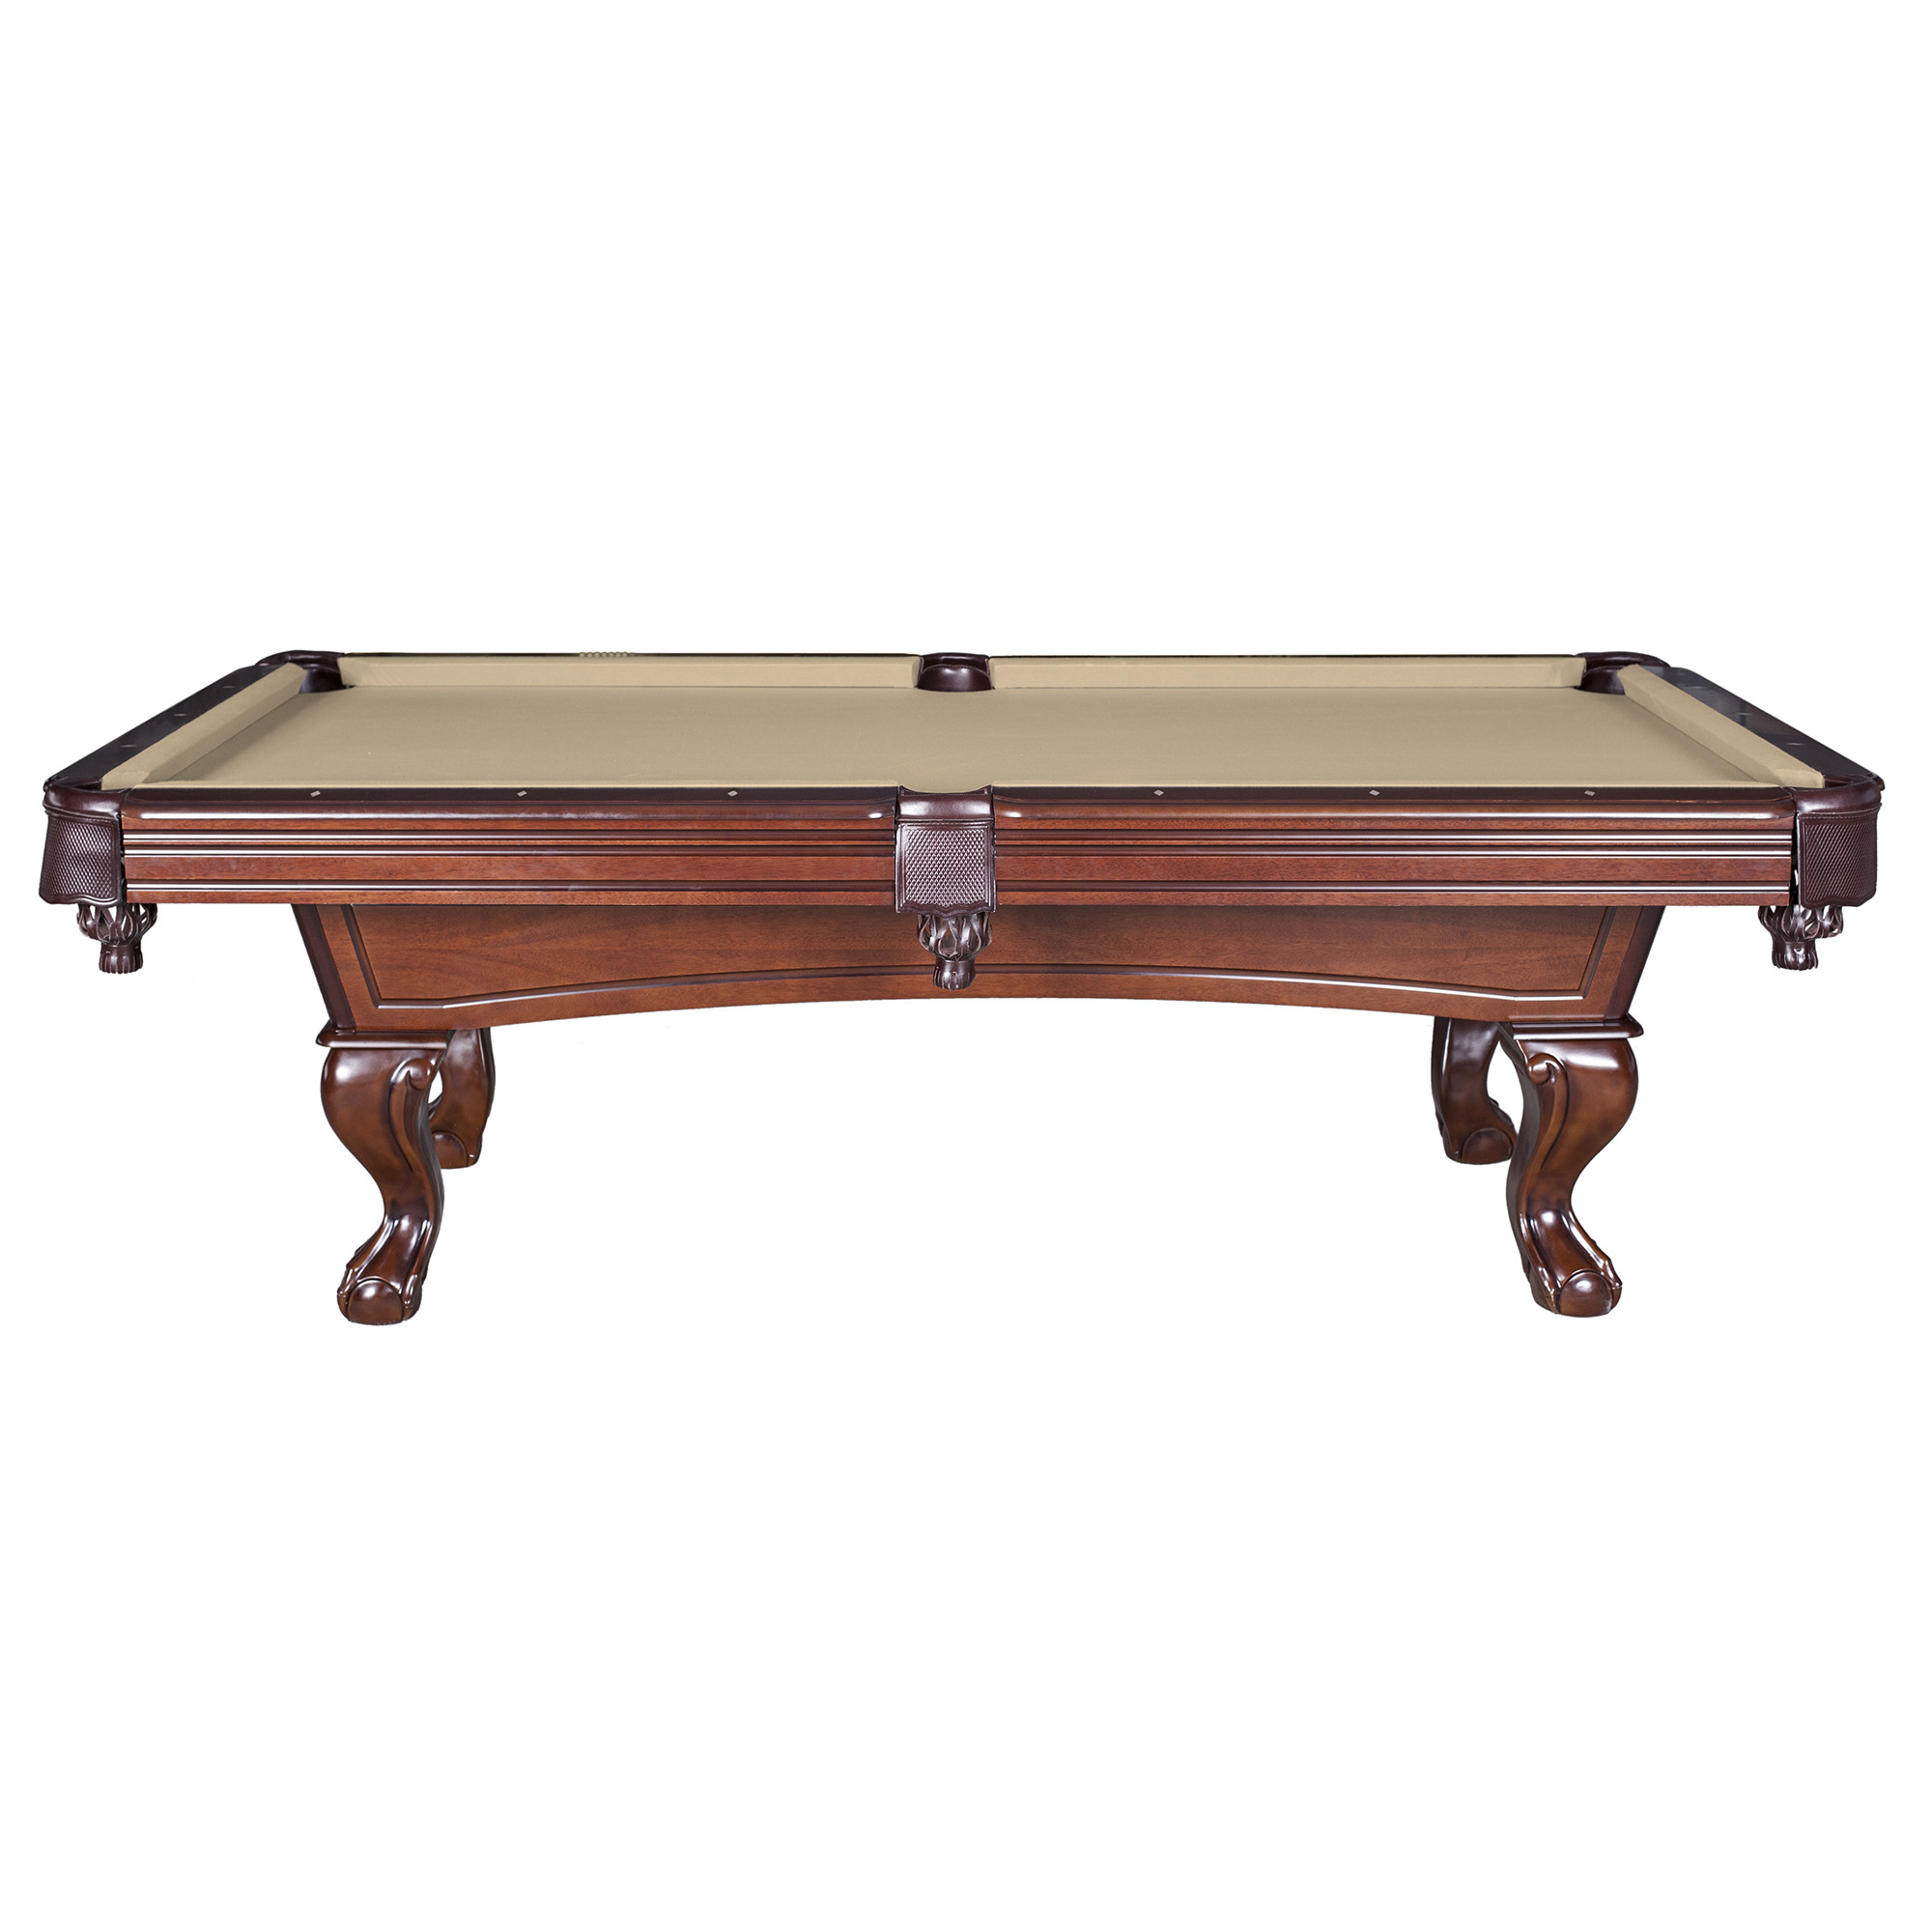 Hathaway Augusta 8 ft. Non-Slate Pool Table - Walnut Finish, 100.5-in l x 55-in w, Camel Felt - image 2 of 14